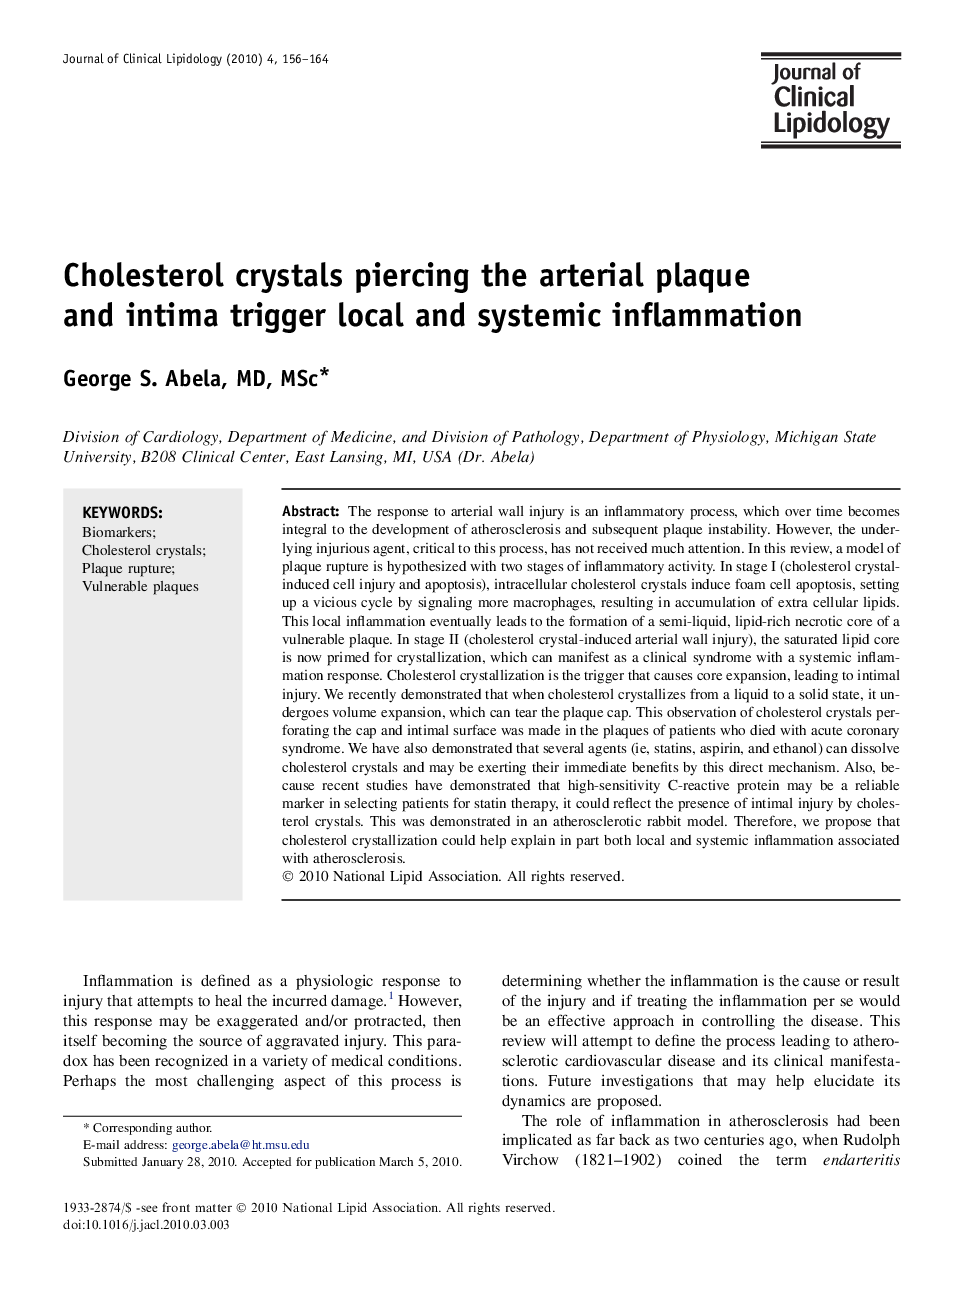 Cholesterol crystals piercing the arterial plaque and intima trigger local and systemic inflammation